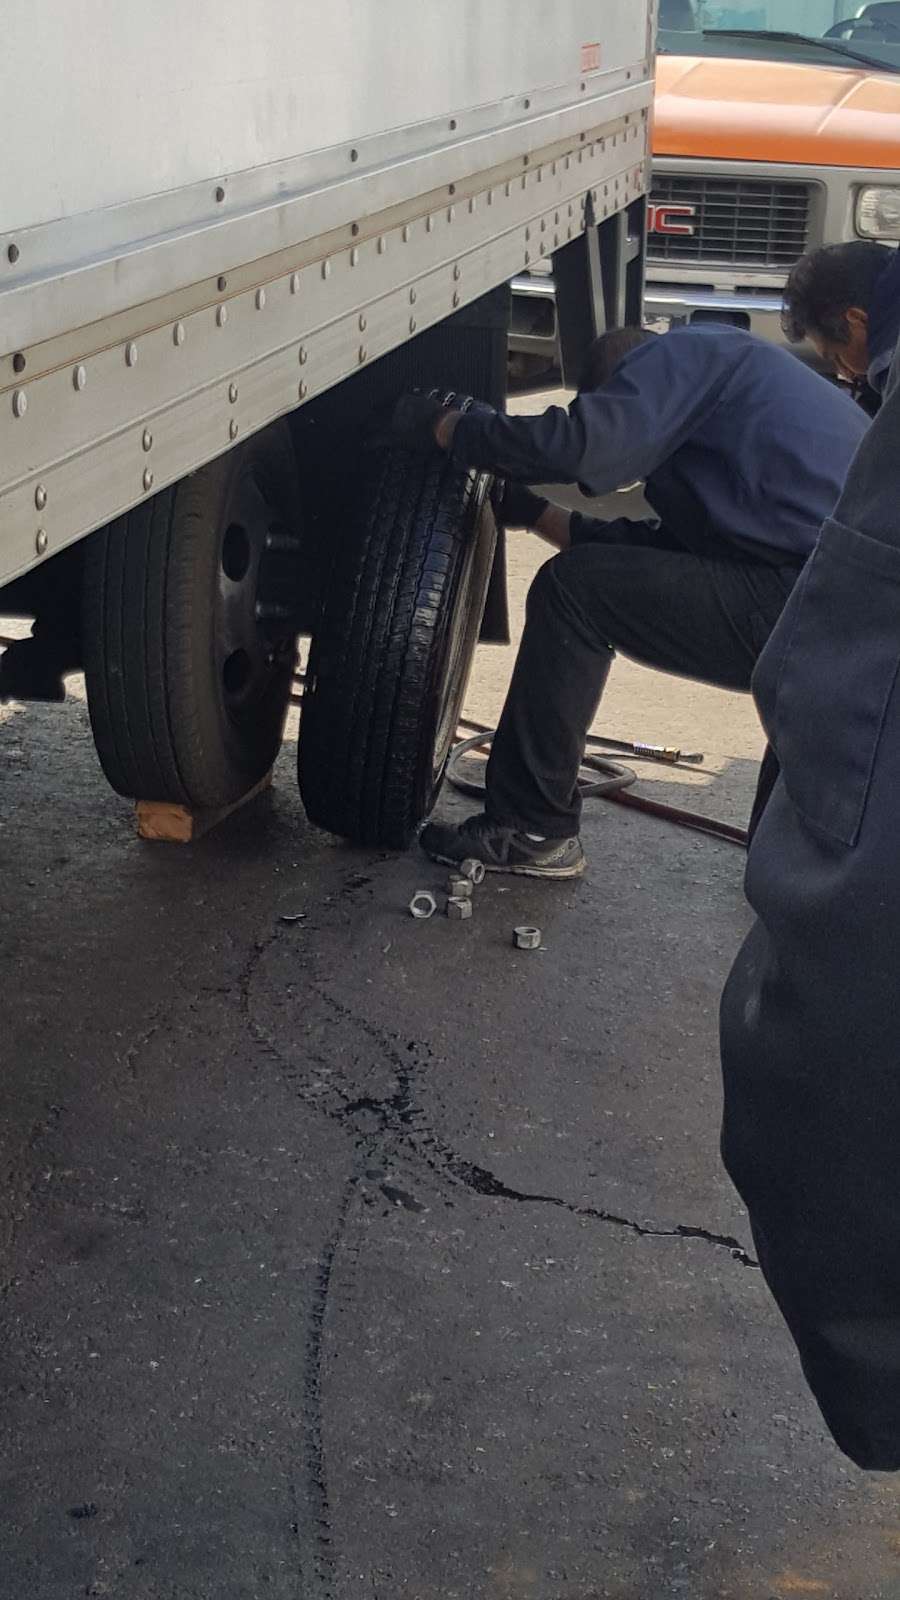 Amaya Tires 24 Hours Road Services | Photo 10 of 10 | Address: 6206 S Main St, Los Angeles, CA 90003, USA | Phone: (323) 234-2423